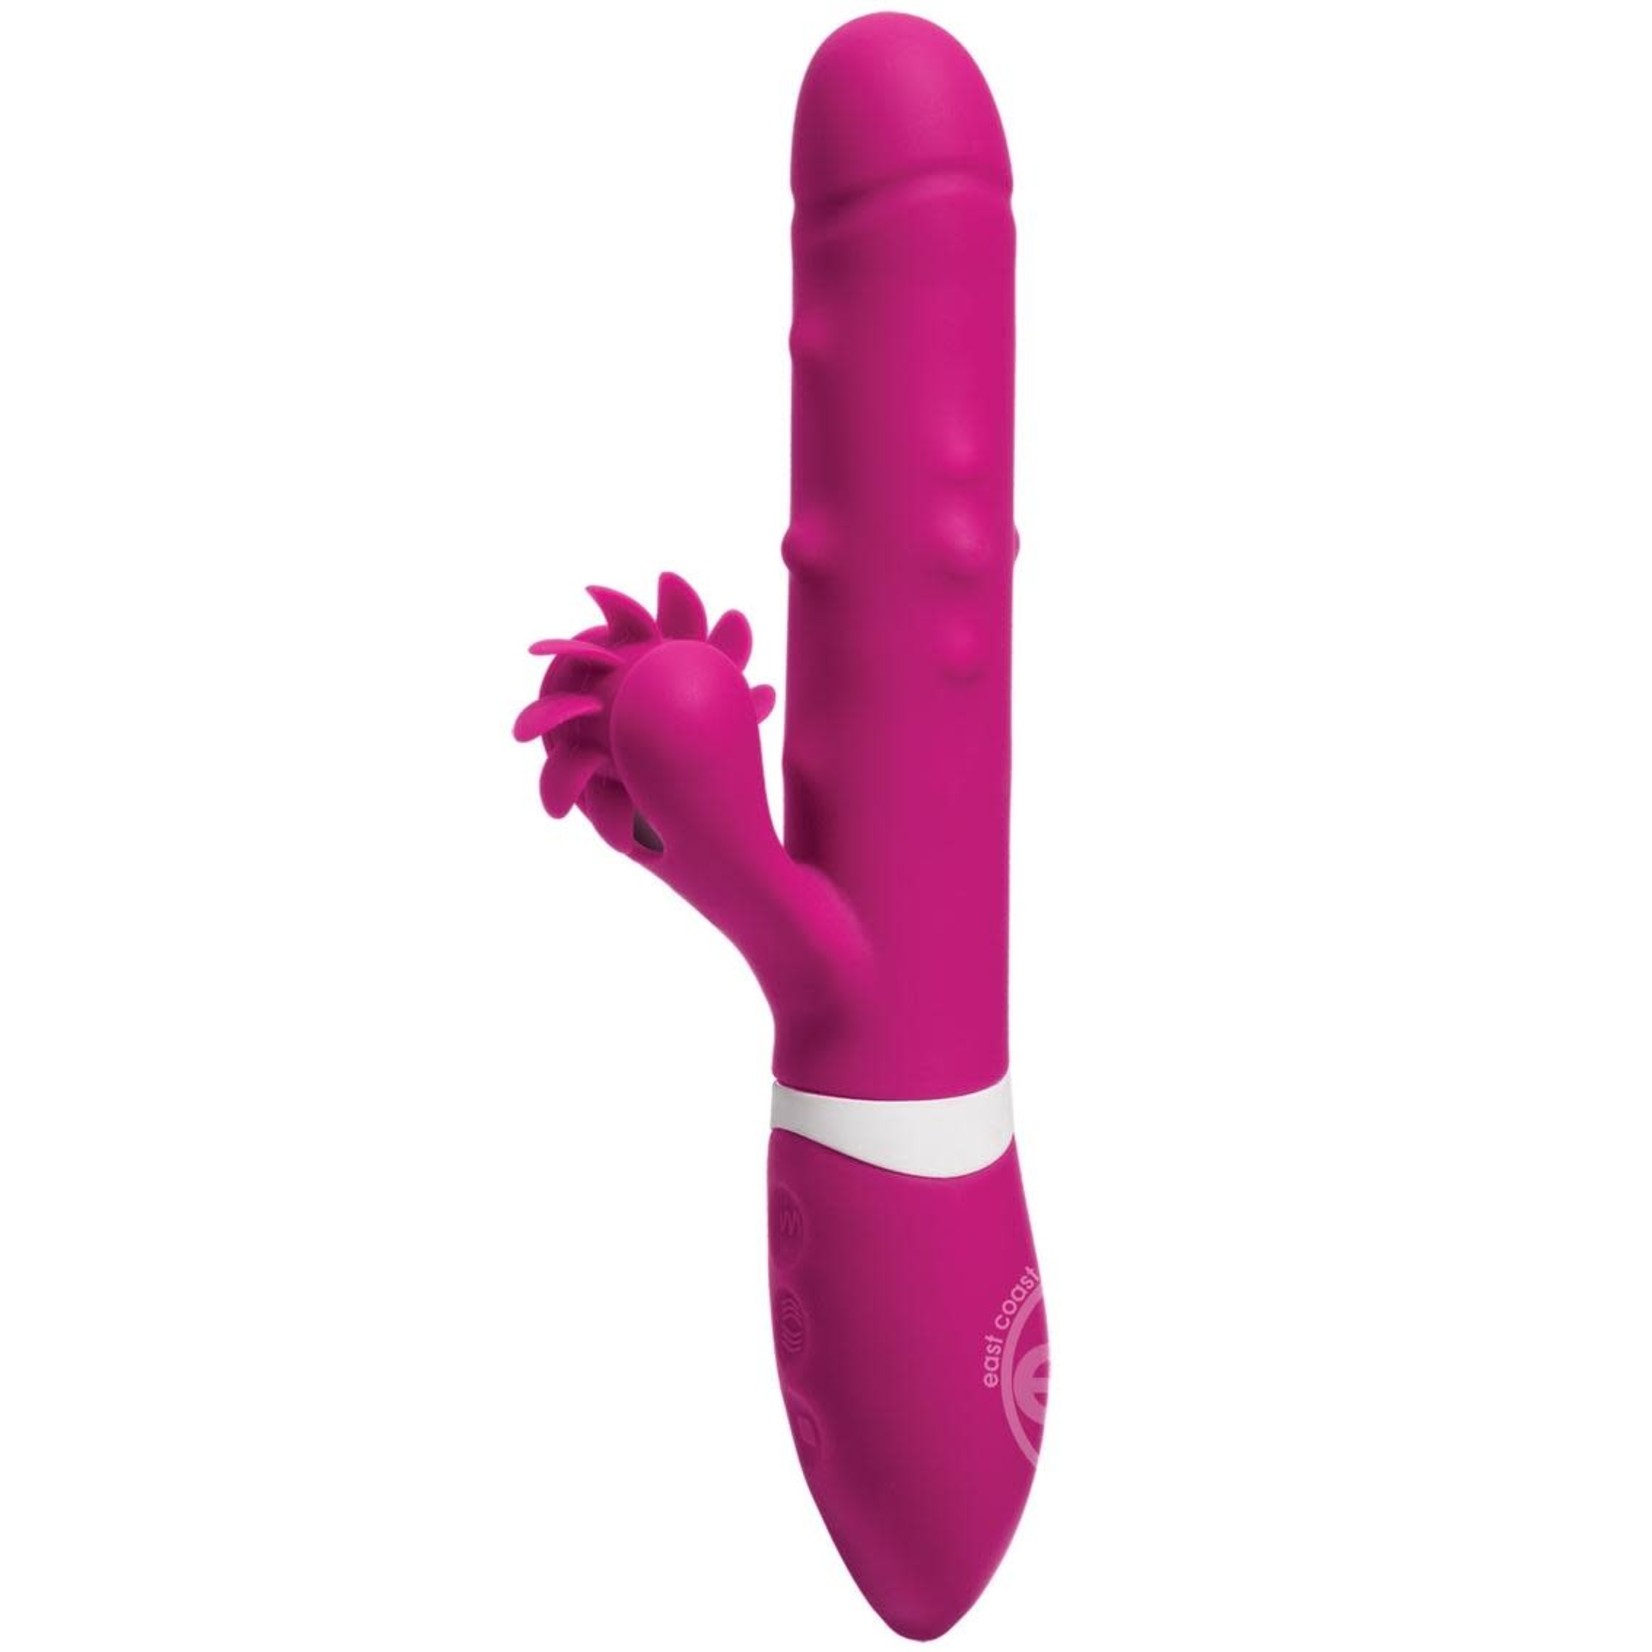 Ivibe Select Iroll Silicone Vibrator Waterproof Pink 9.5 Inch